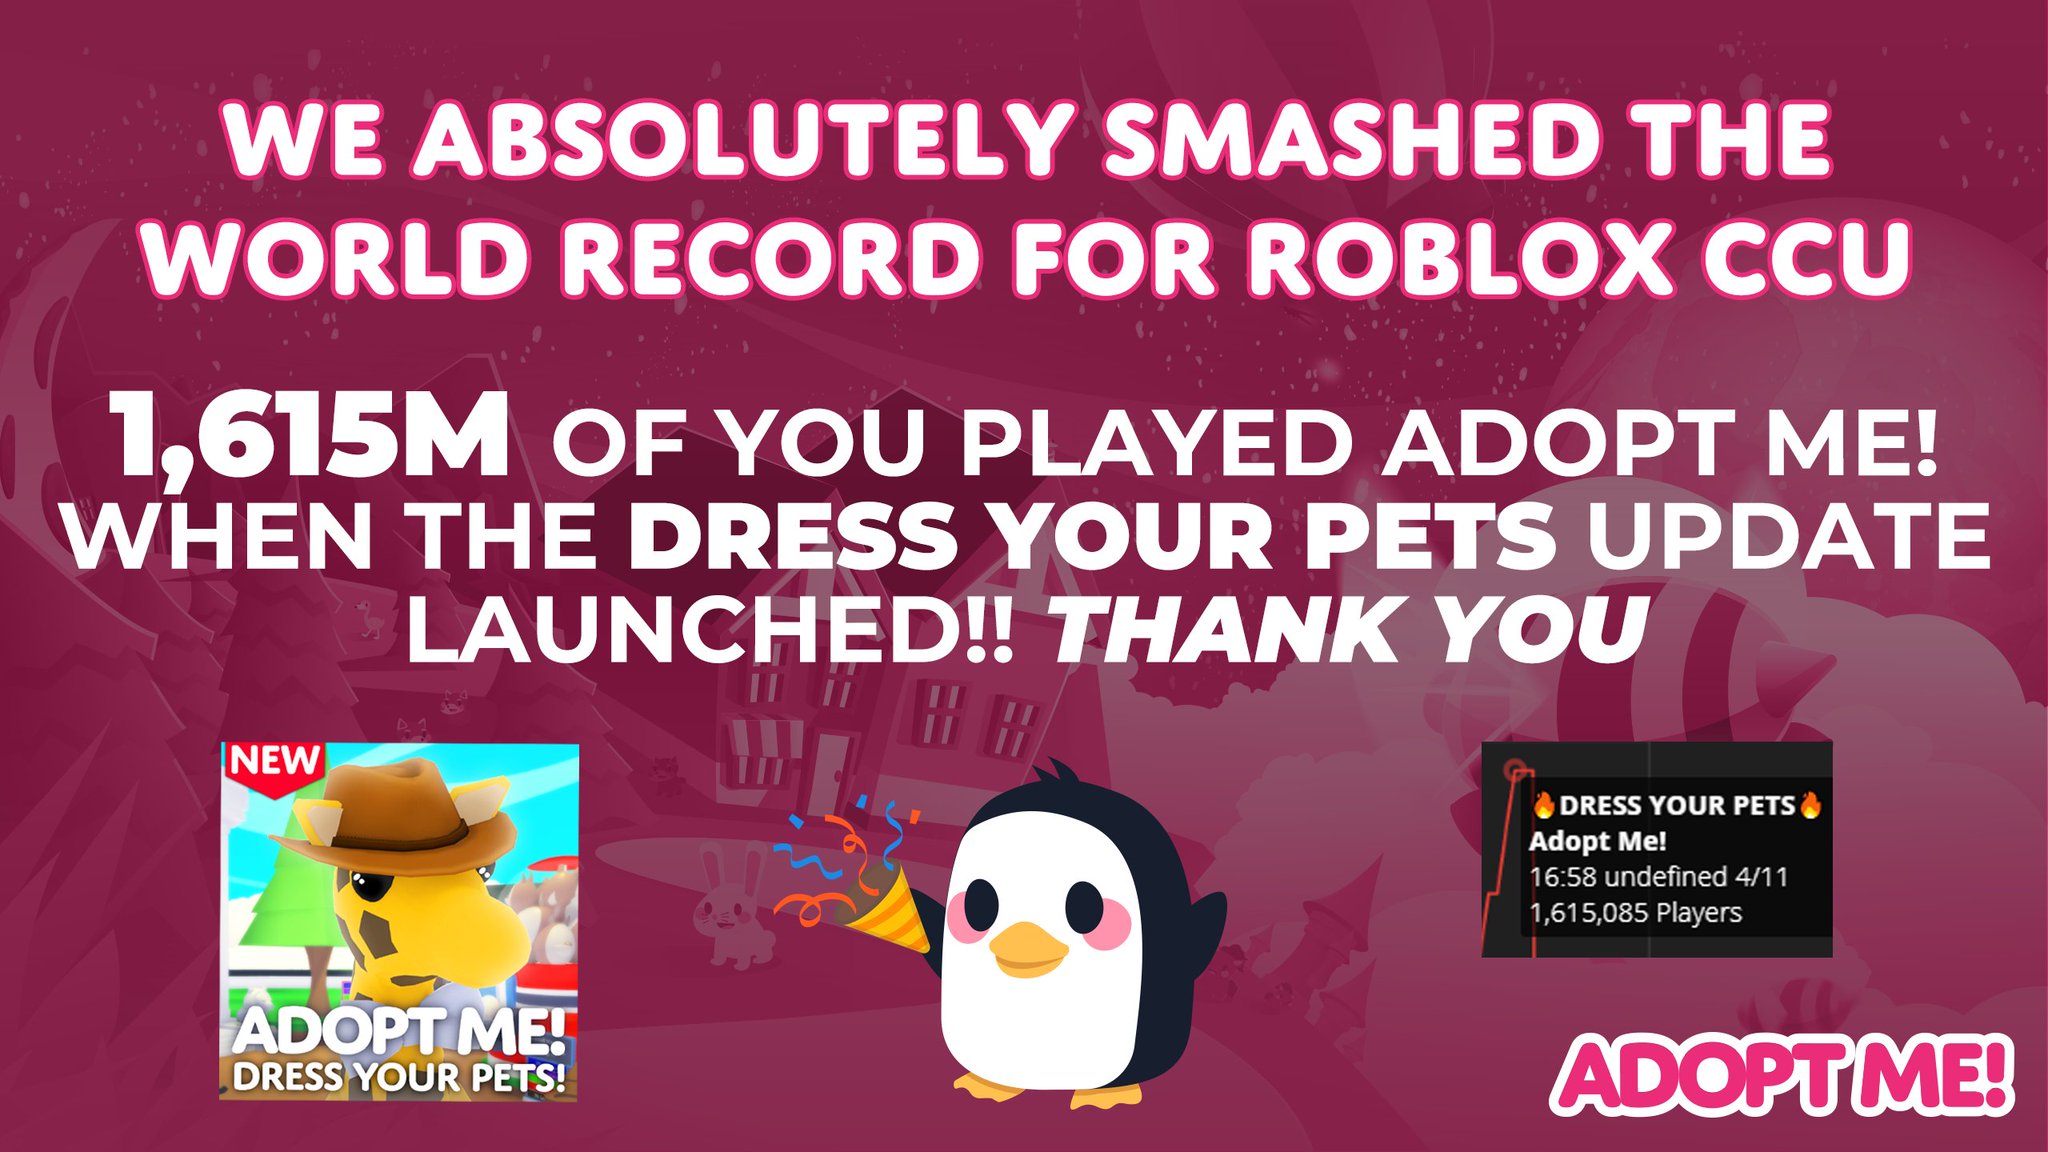 Adopt Me On Twitter The New World Record For Roblox Ccu Players Active Is 1 615 Million Players Thank You So Much For Tuning In To See The Live Event And Apologies - how old are most players on roblox